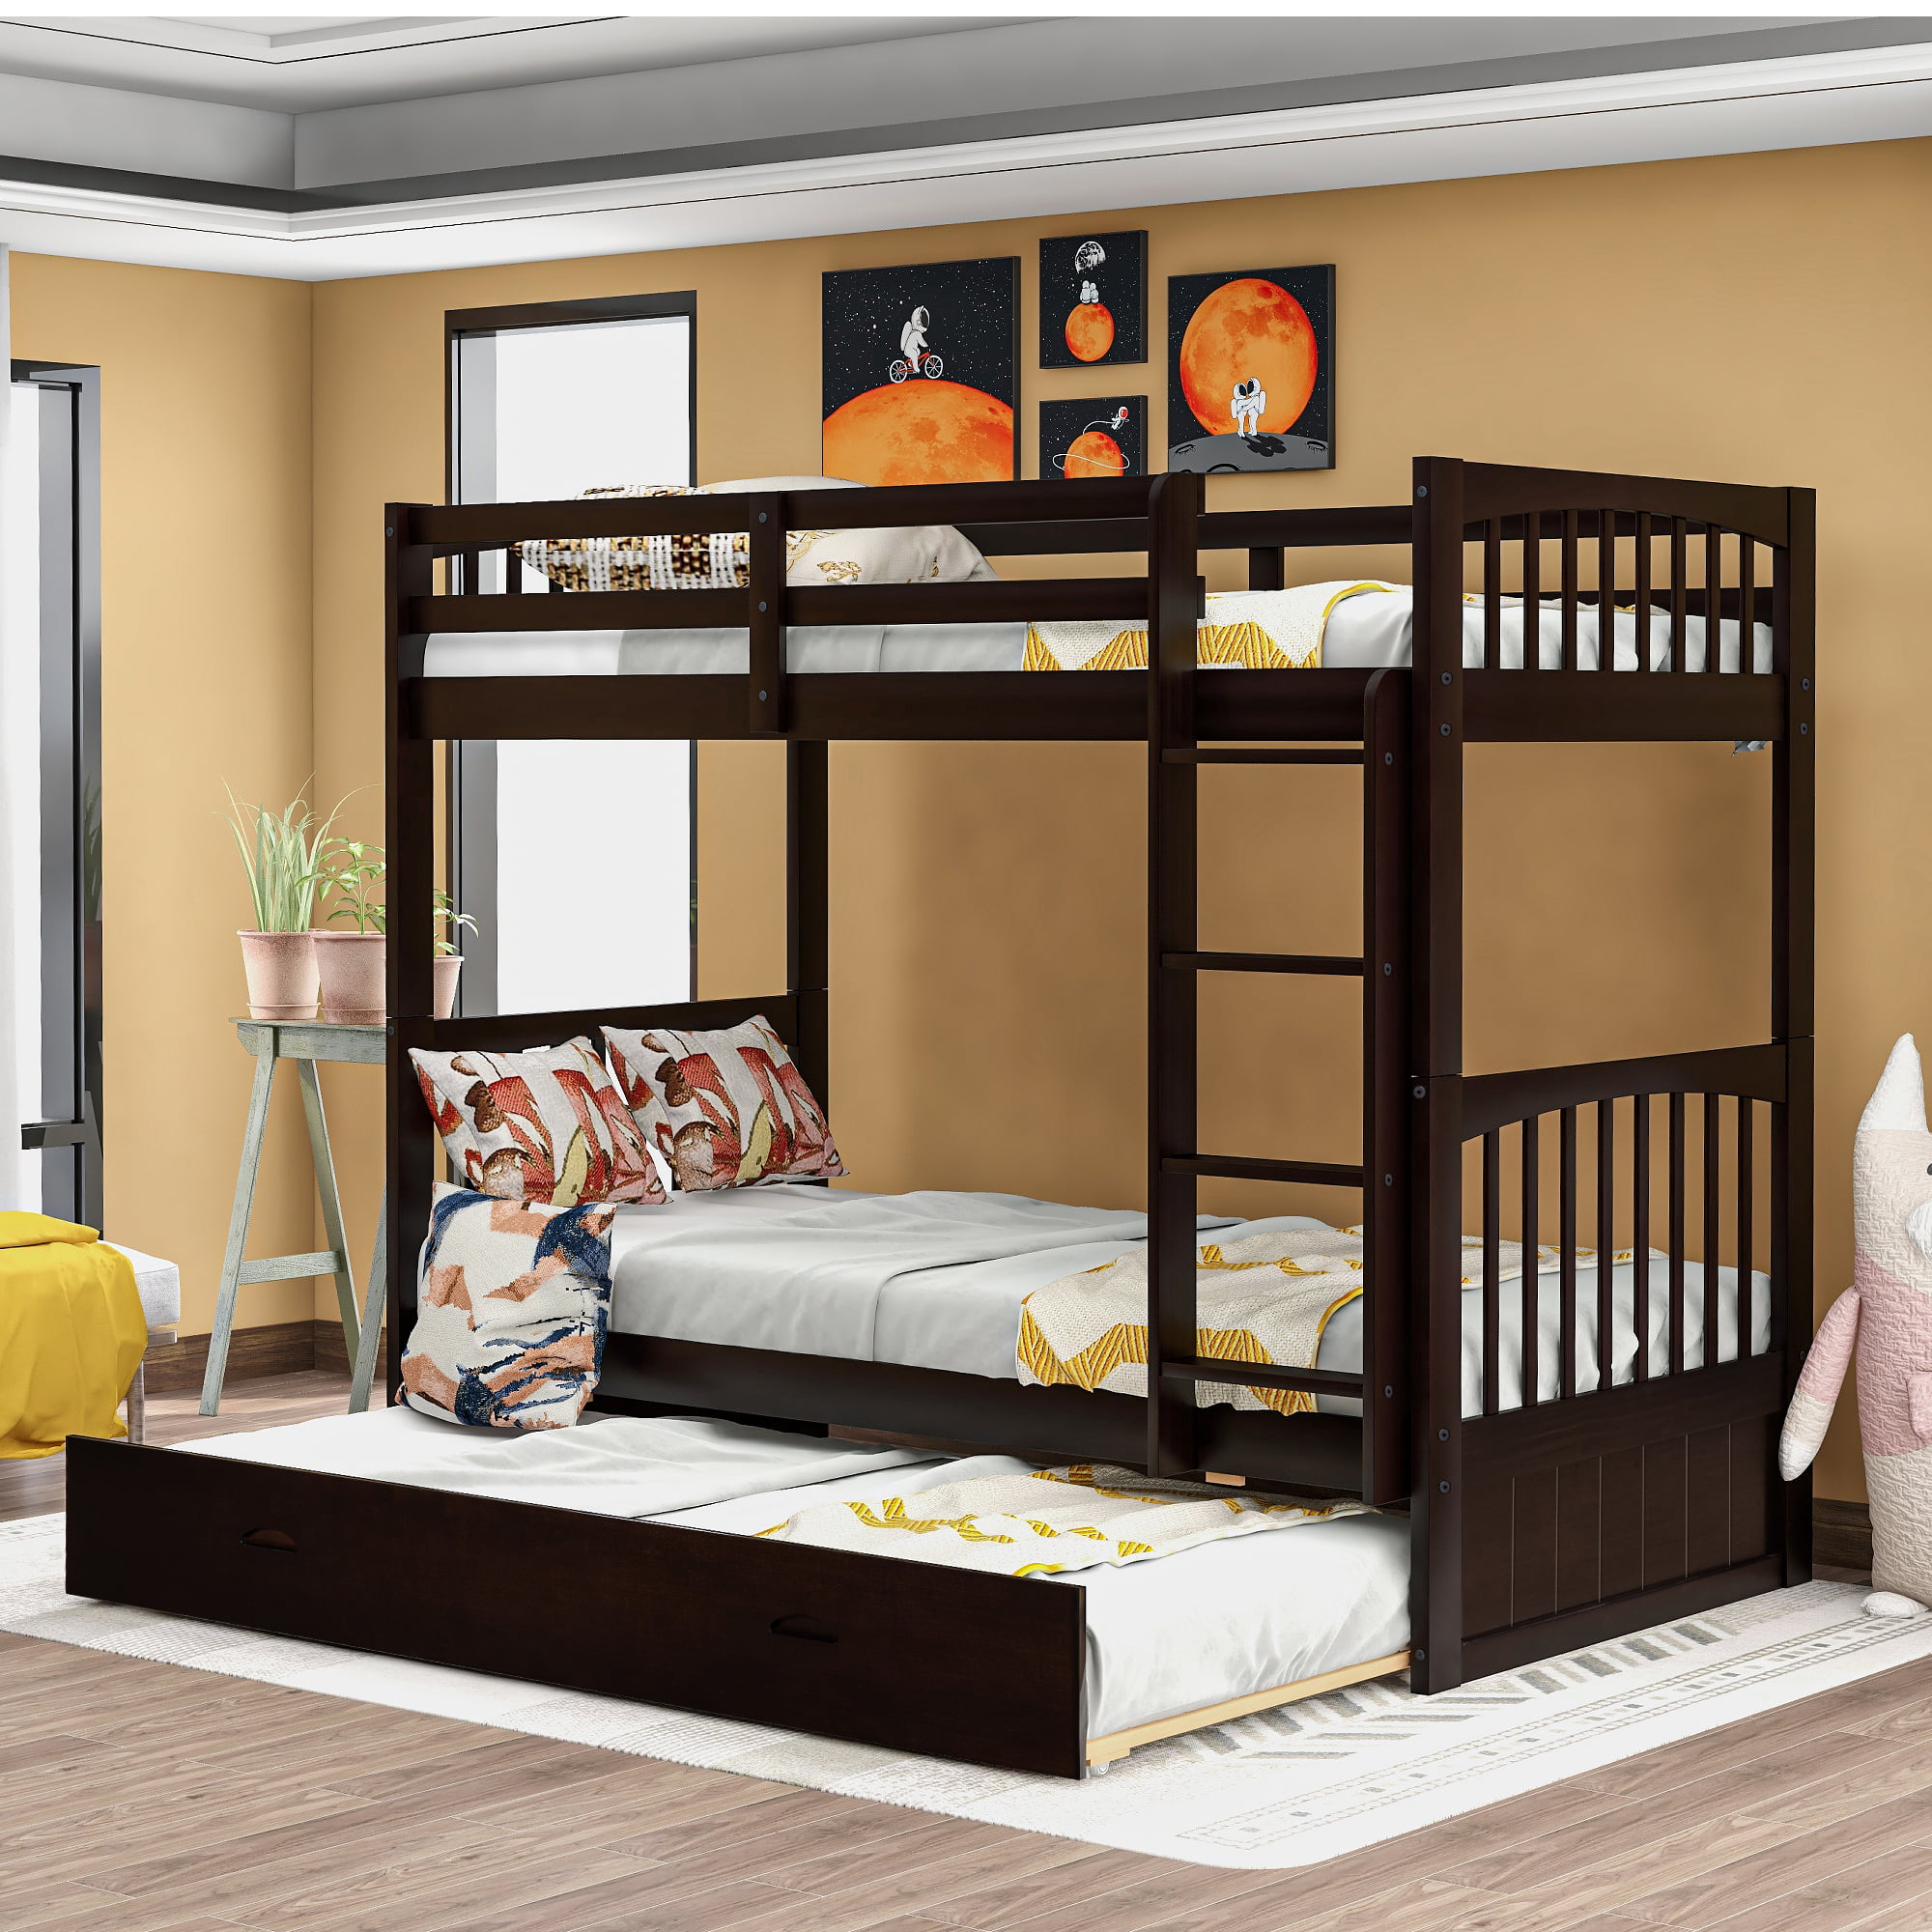 Merax Wood Bunk Bed Twin Over, Pay Weekly Bunk Beds